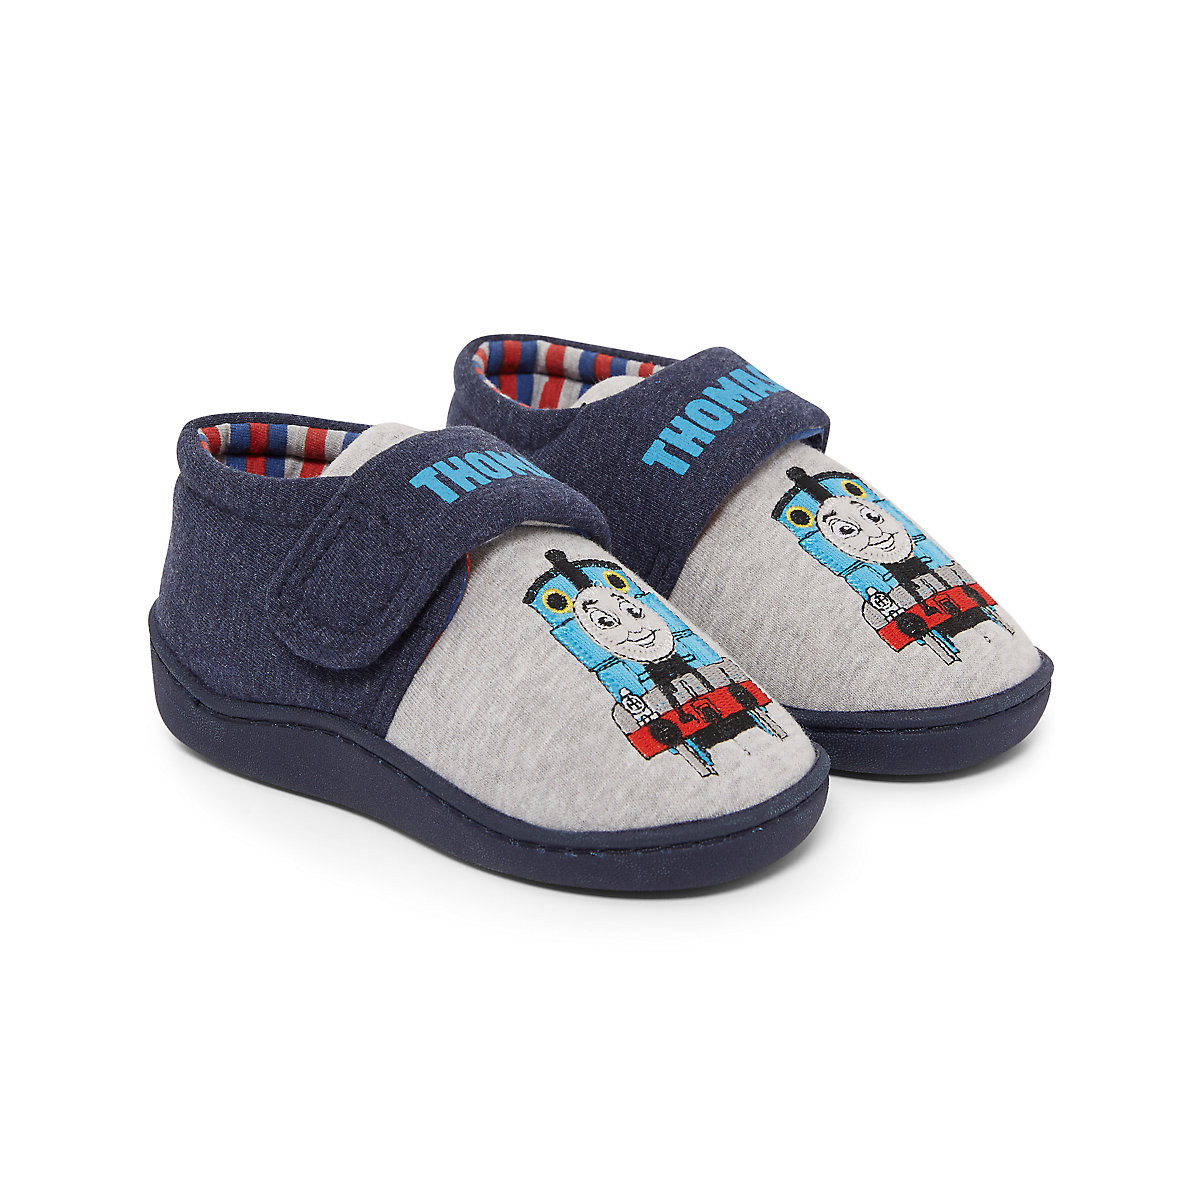 Thomas & Friends Thomas The Tank Engine Cupsole Slippers - Reviews